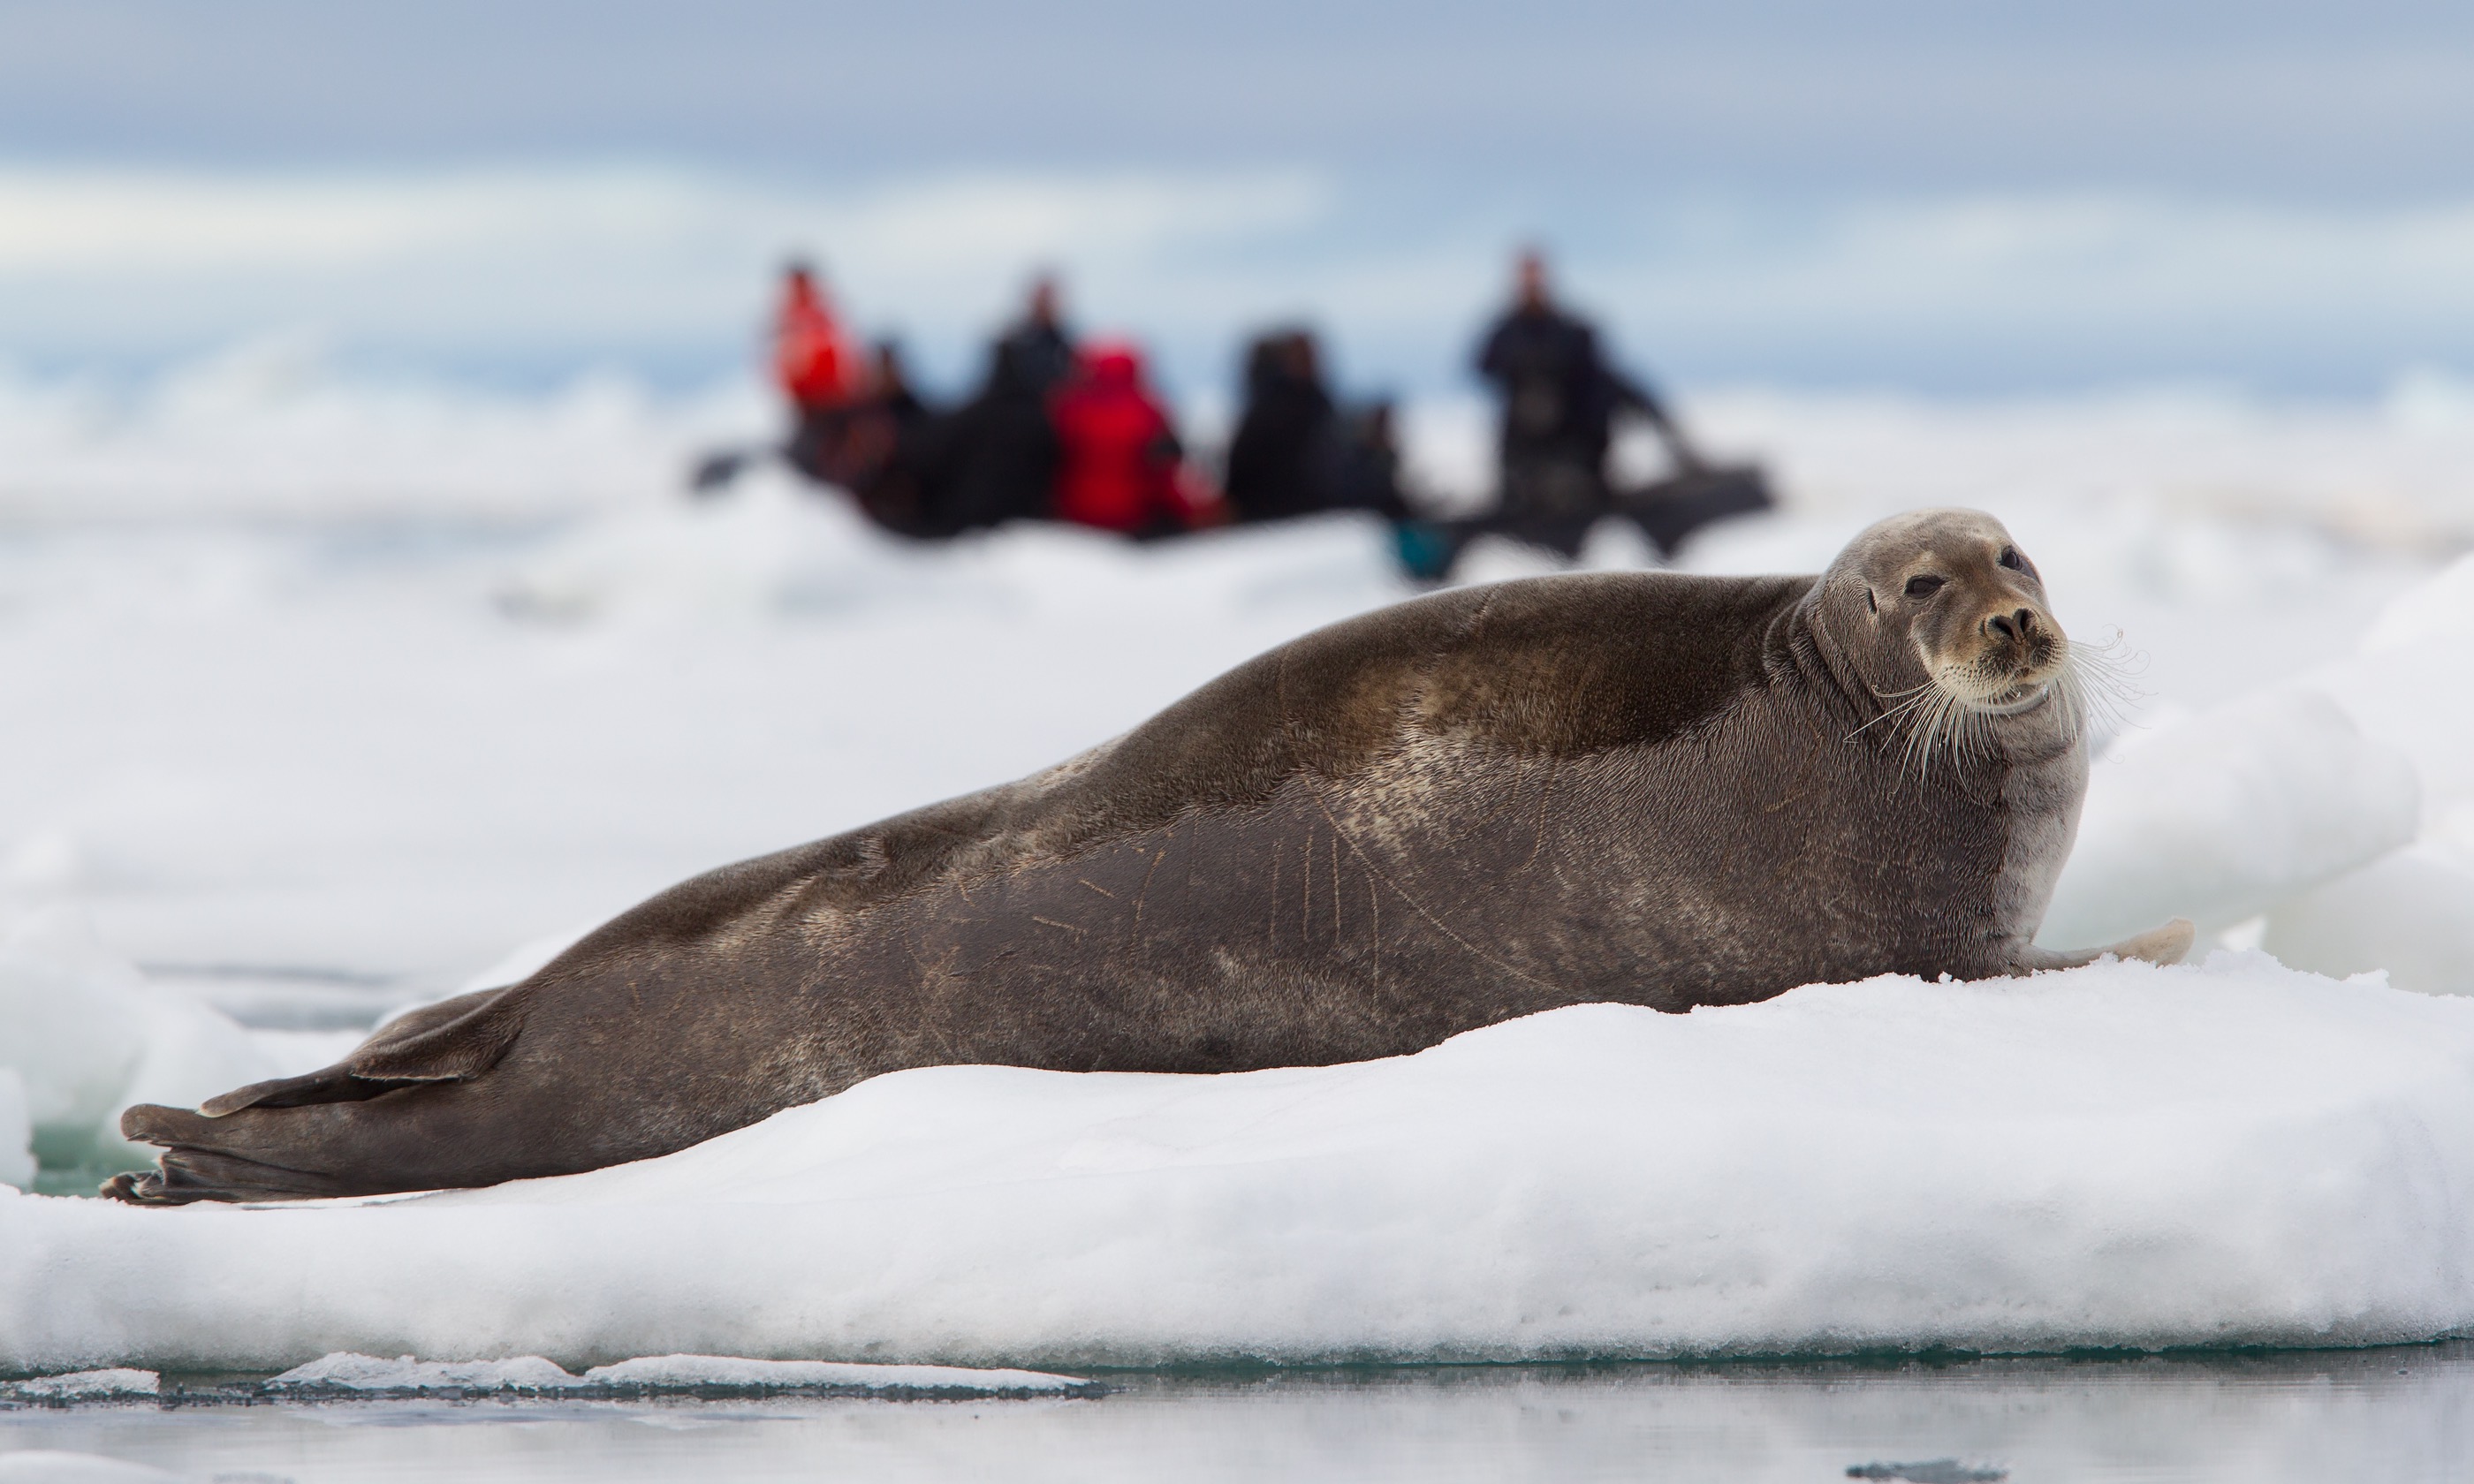 Bearded seal being watched by travellers (Shutterstock.com)